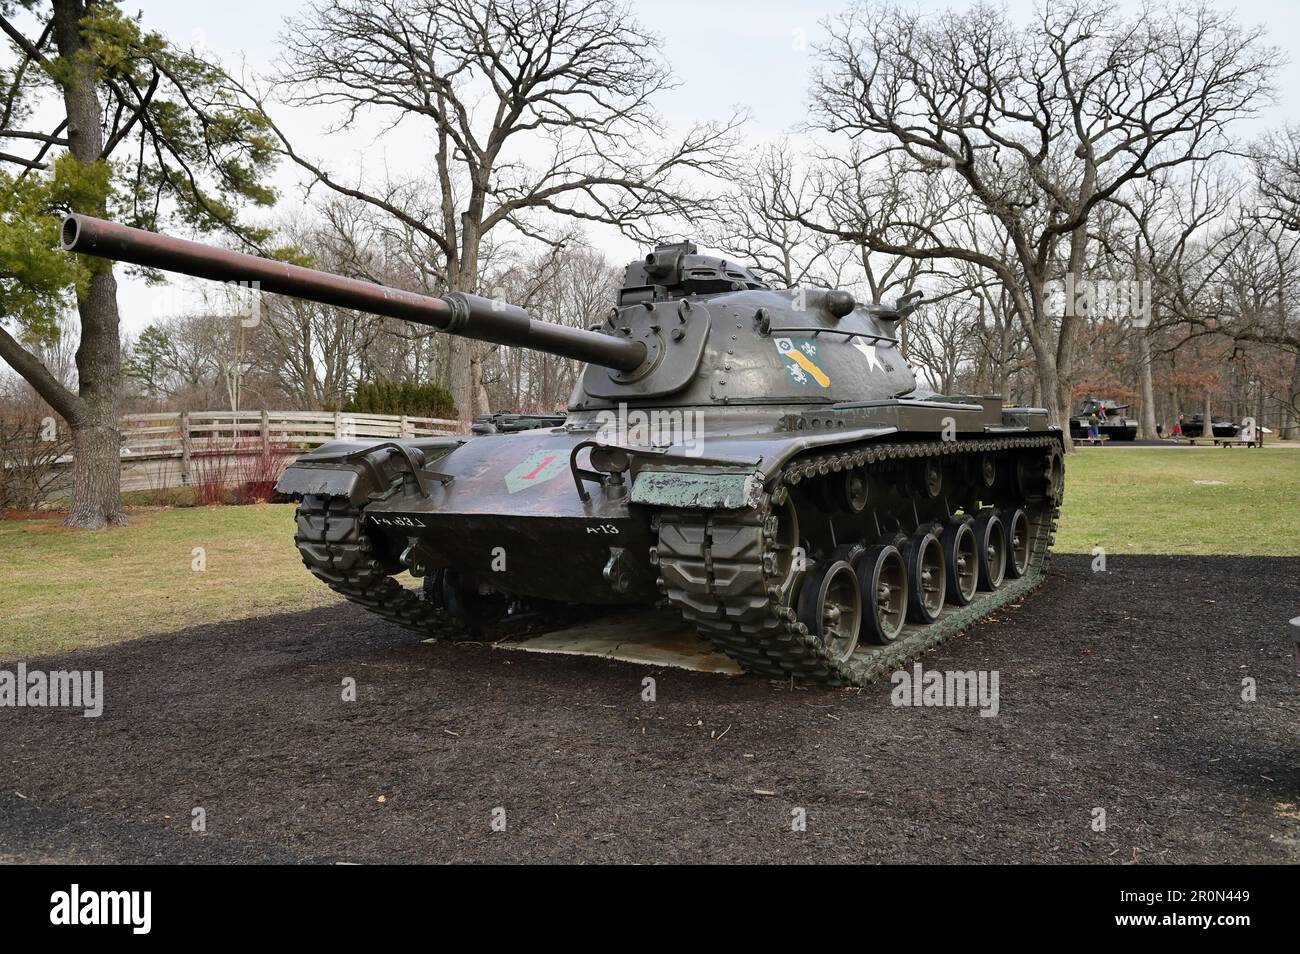 Wheaton, Illinois, USA. A M60 Army tank, one of numerous historic tank vehicles at Cantigny Park. The M60 was used from 1960-1980. Stock Photo